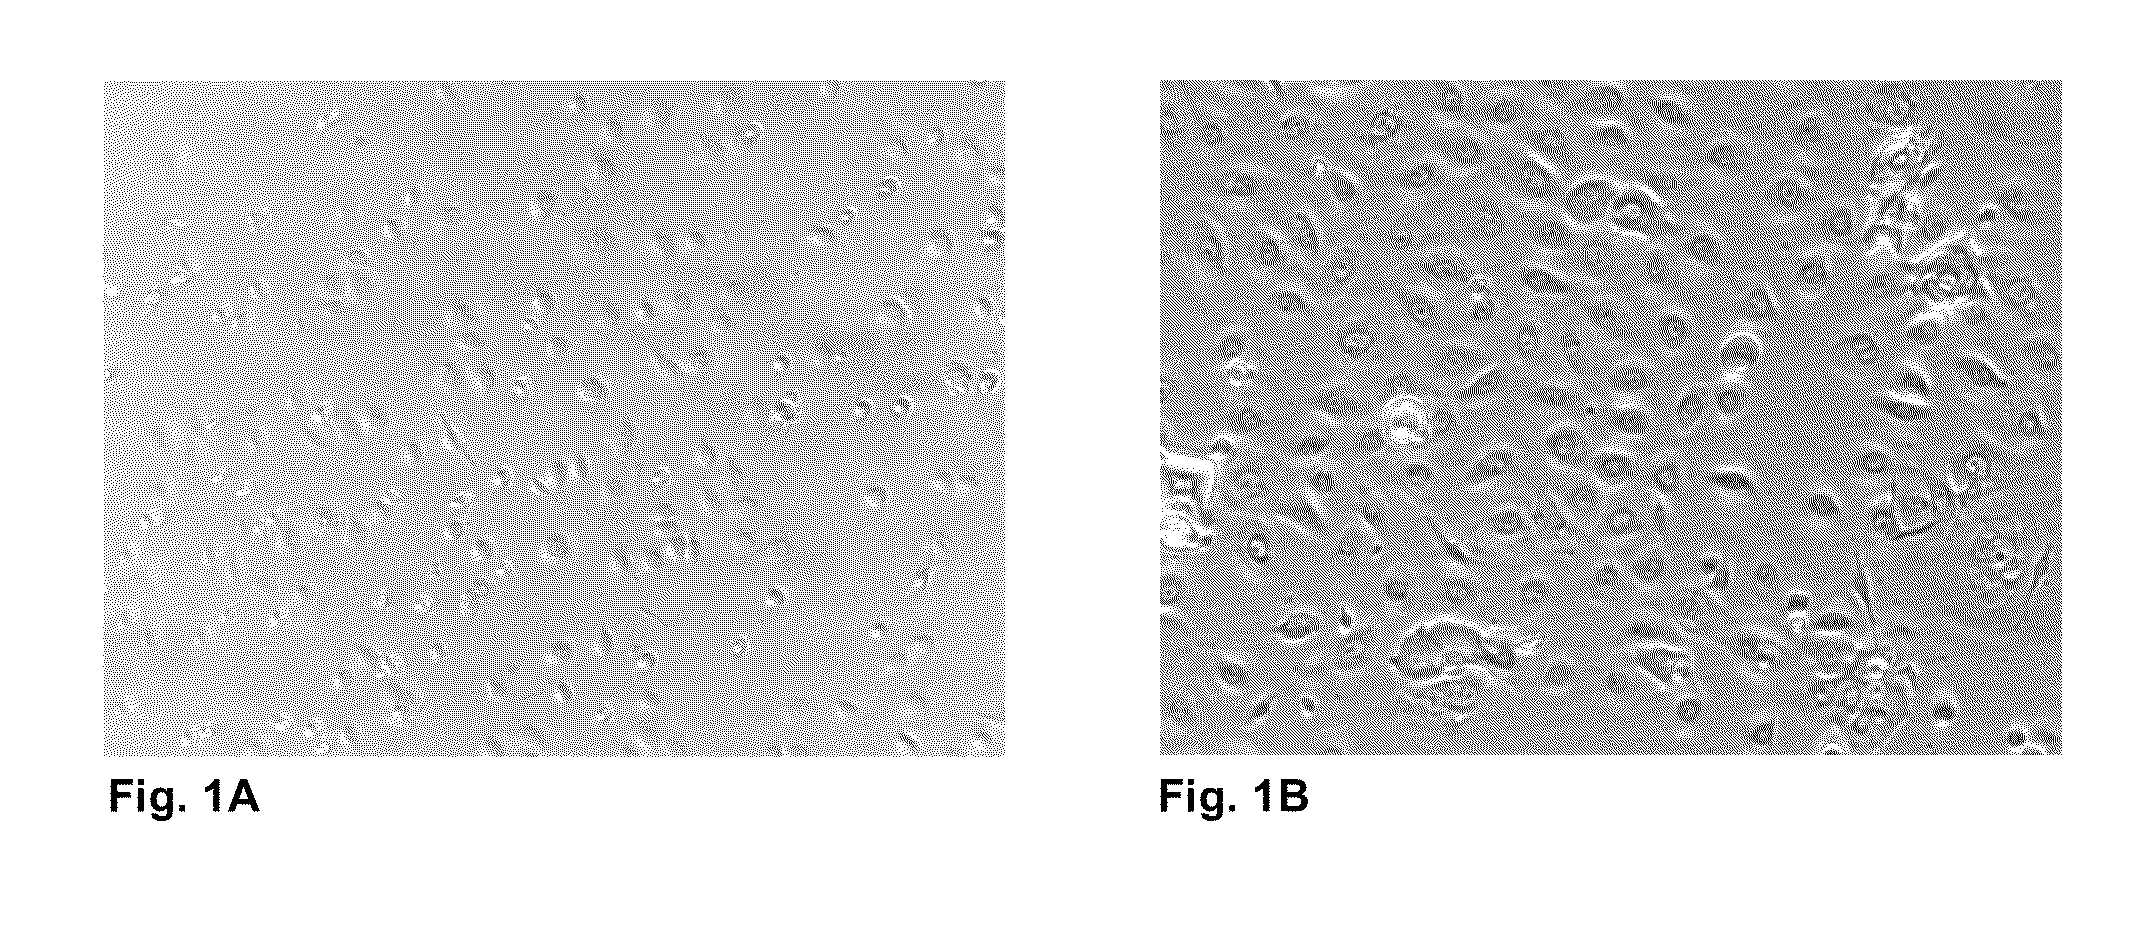 Cell Compositions and Methods for Hair Follicle Generation